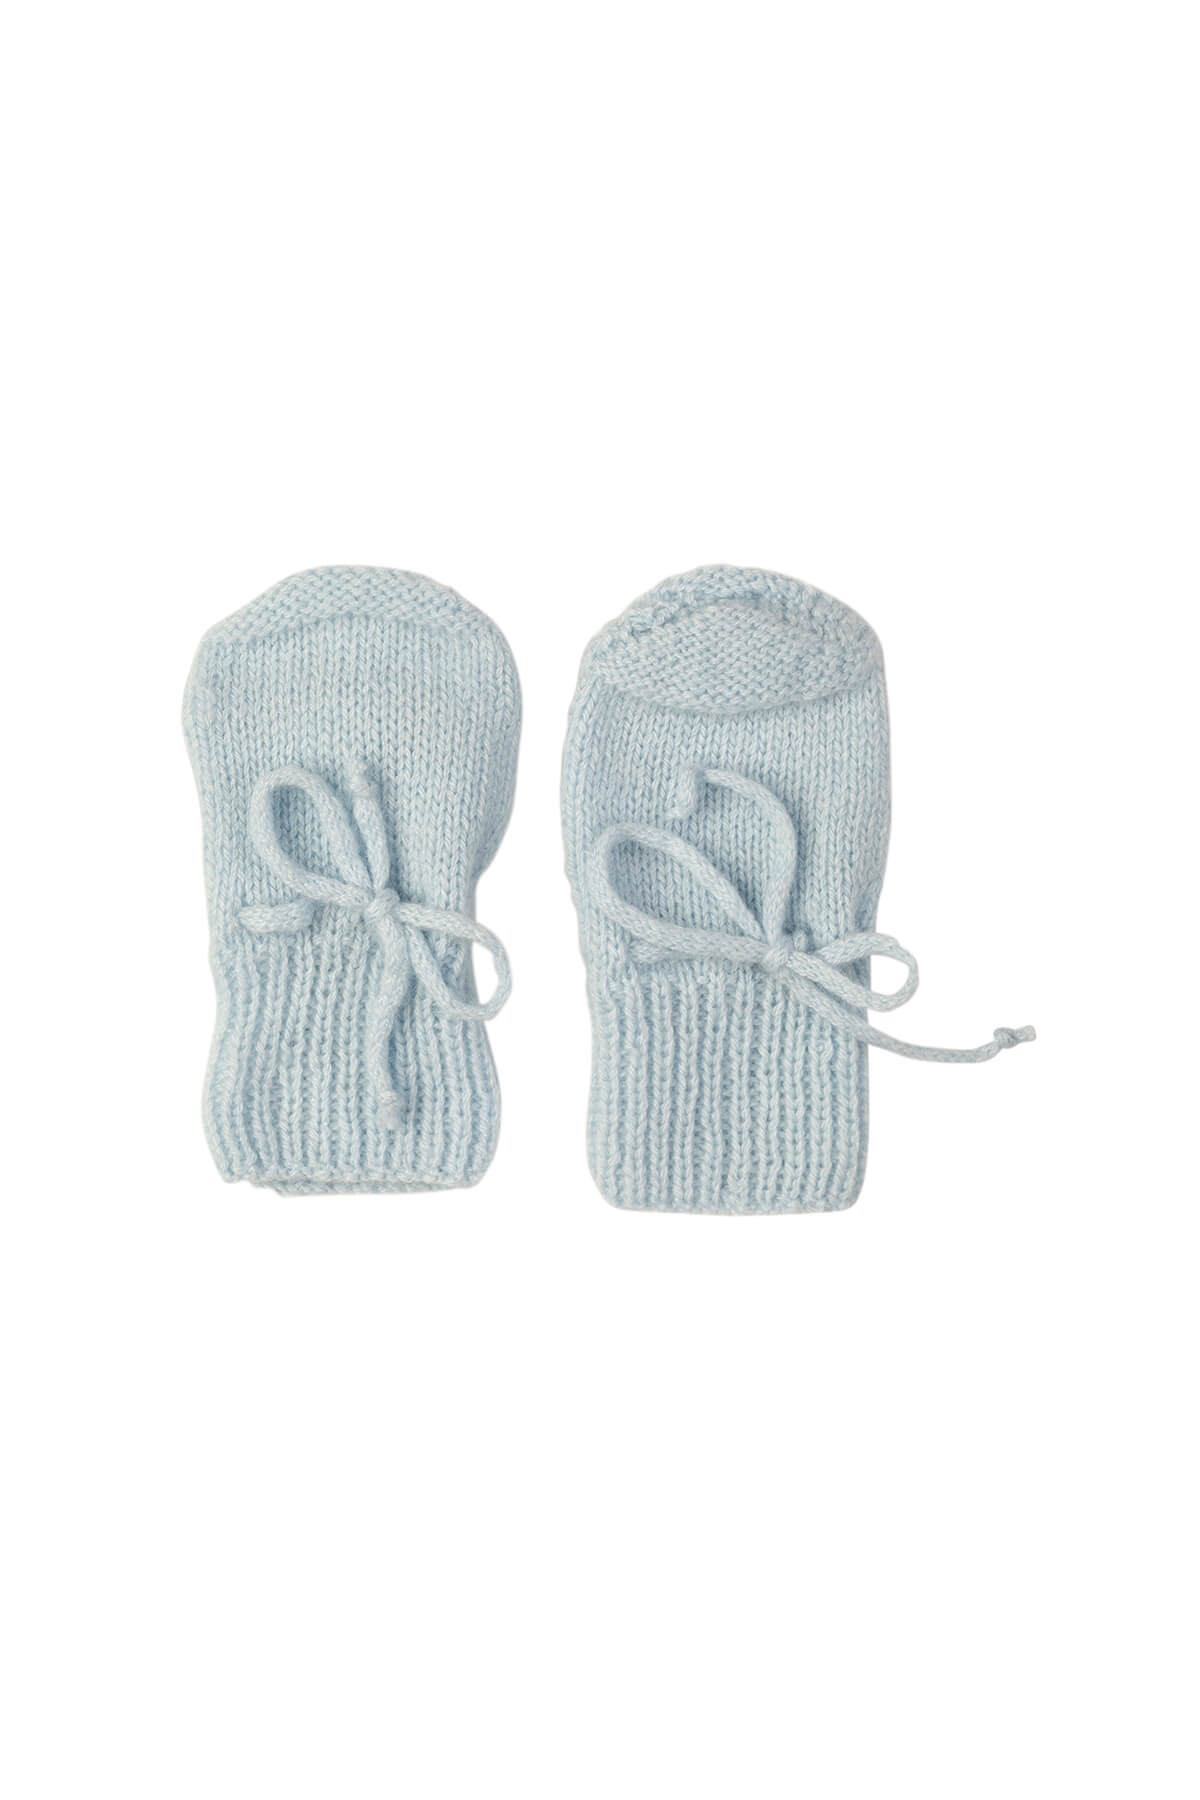 Johnstons of Elgin’s Baby's 1st Cashmere Accessories Gift Set with Powder Blue Cashmere Baby Mittens on a white background AW21GIFTSET20C